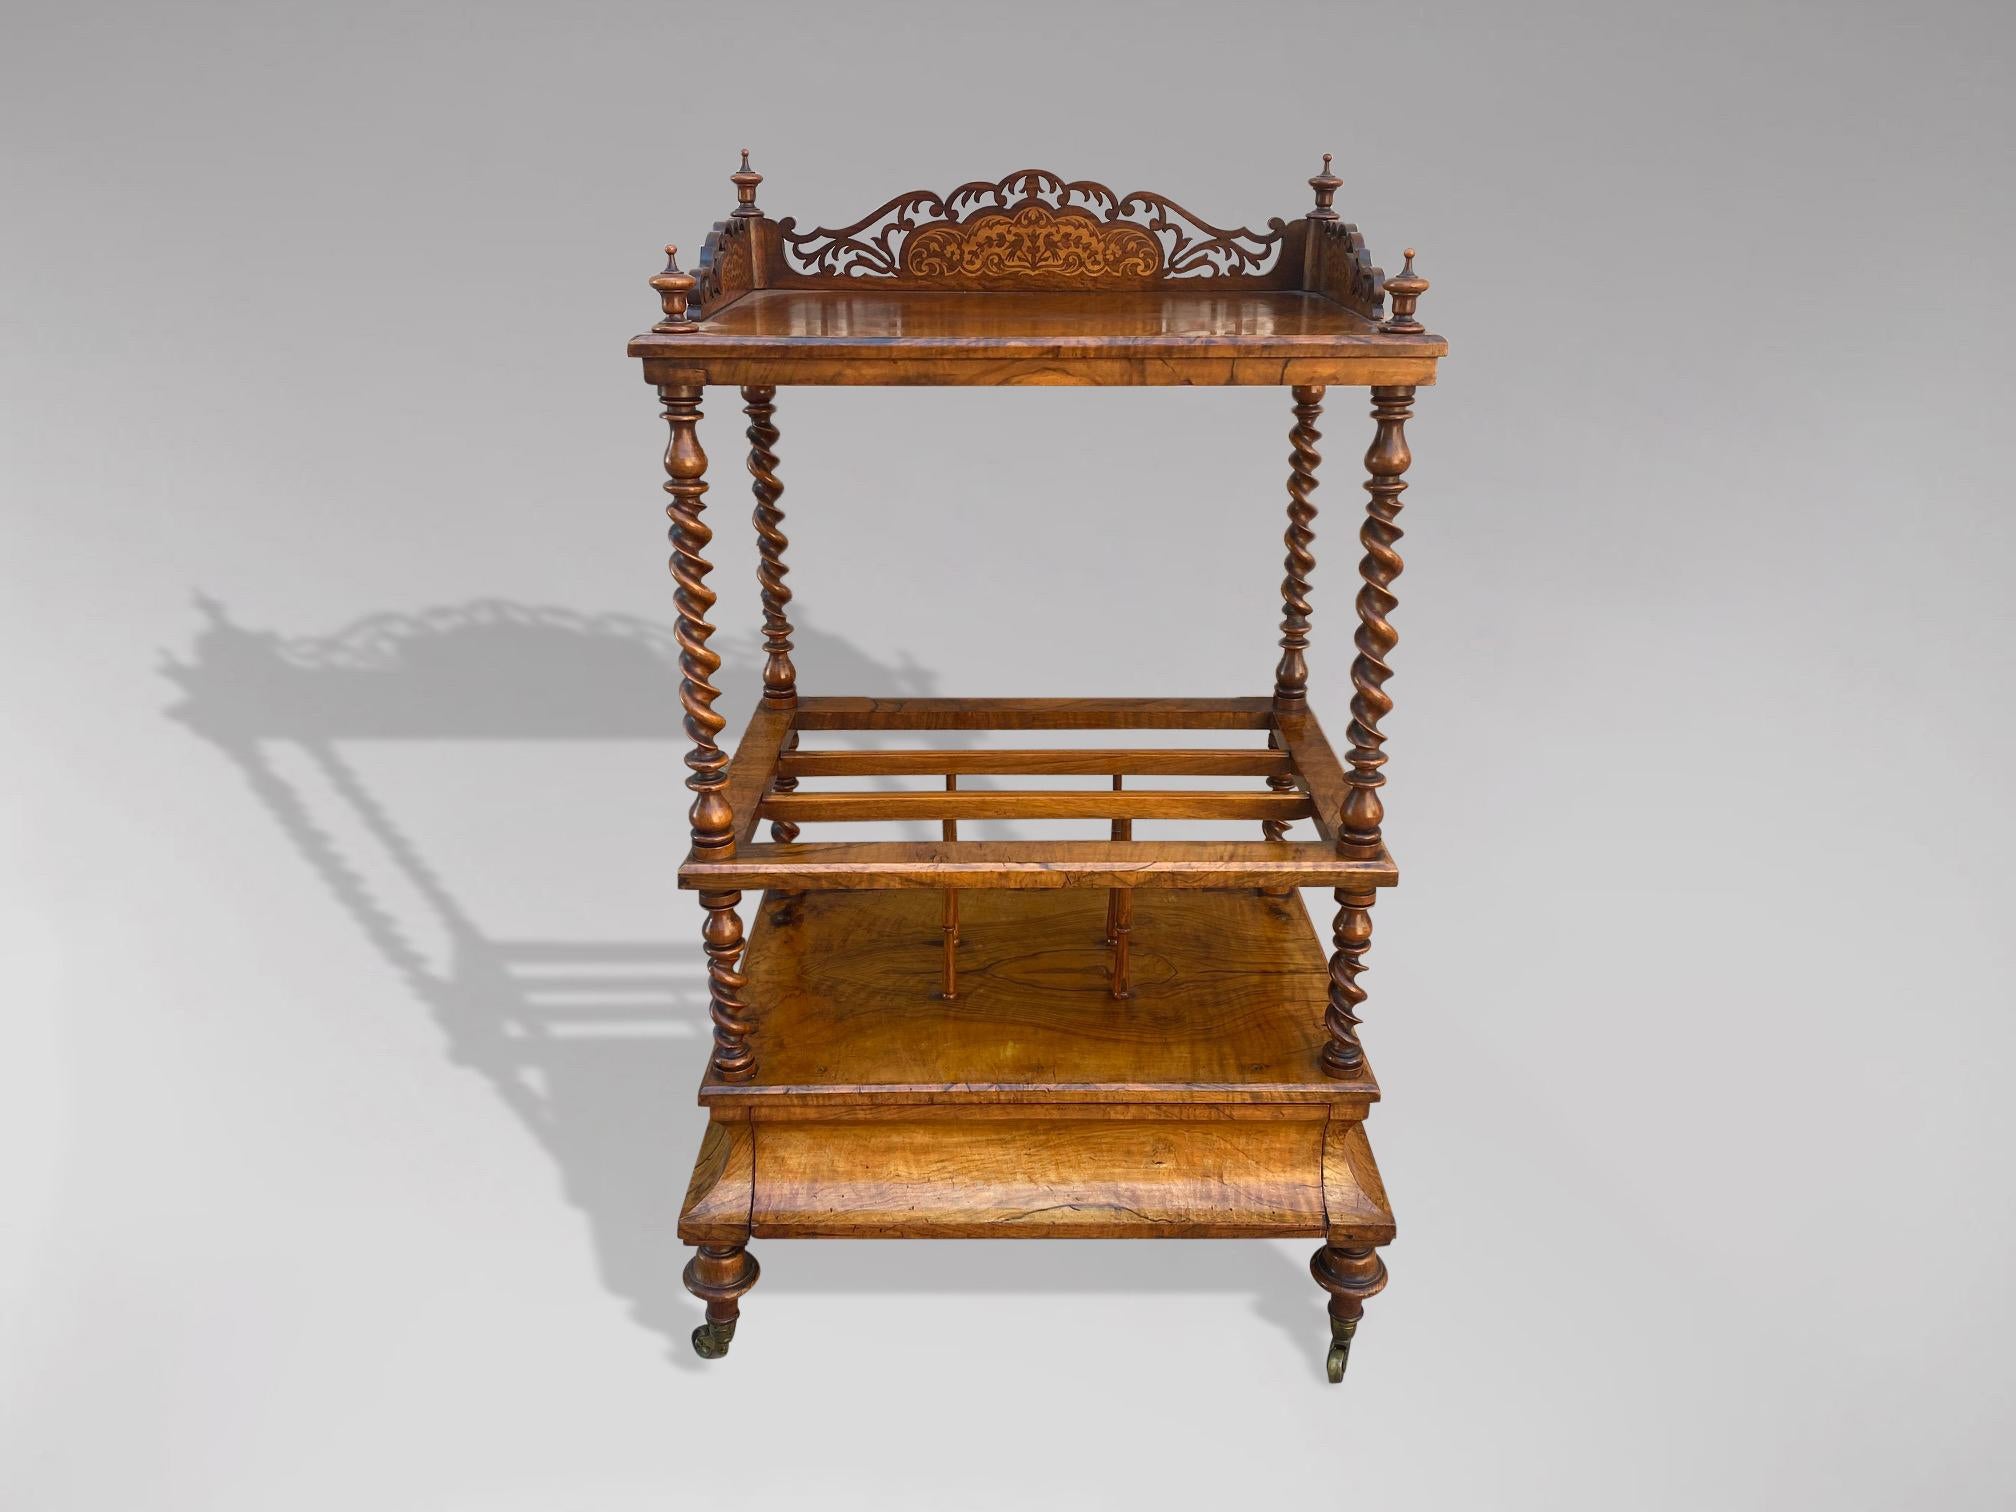 A 19th century, early Victorian period walnut and inlaid Canterbury whatnot music stand, barley twist supports, with blind frieze drawer to the cavetto base, all standing on 4 elegant feet terminating on brass castors. England circa 1850. Gorgeous